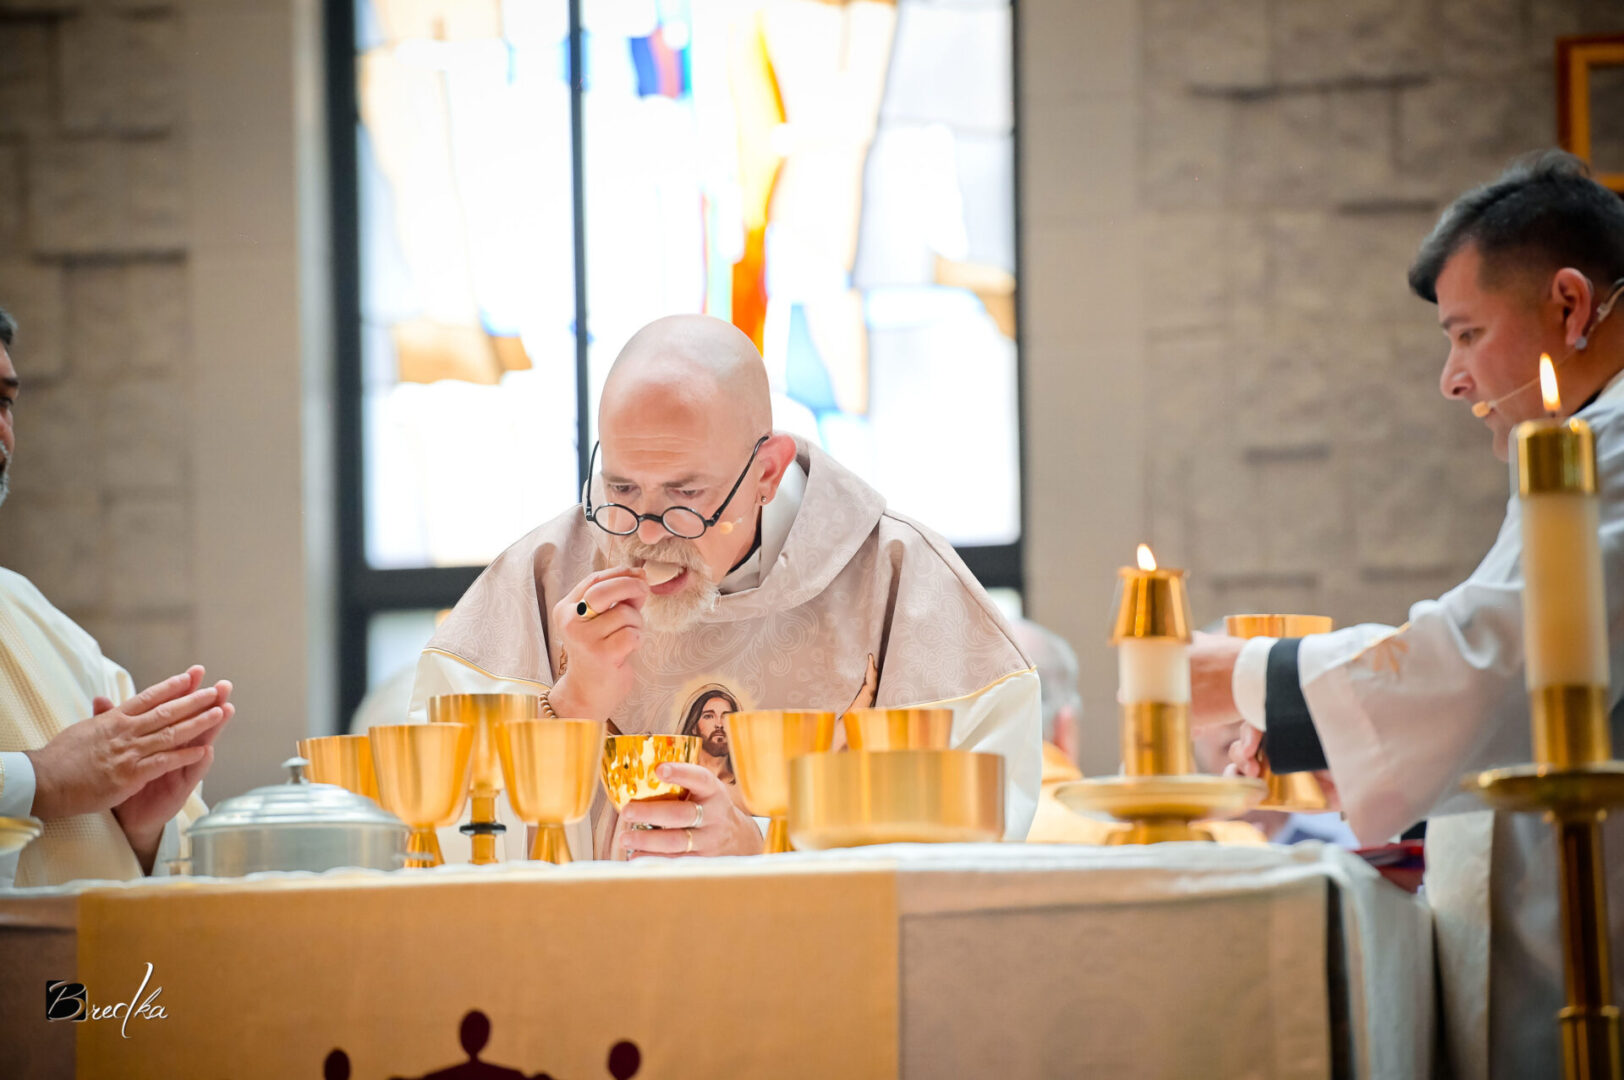 Priest receiving communion during mass.